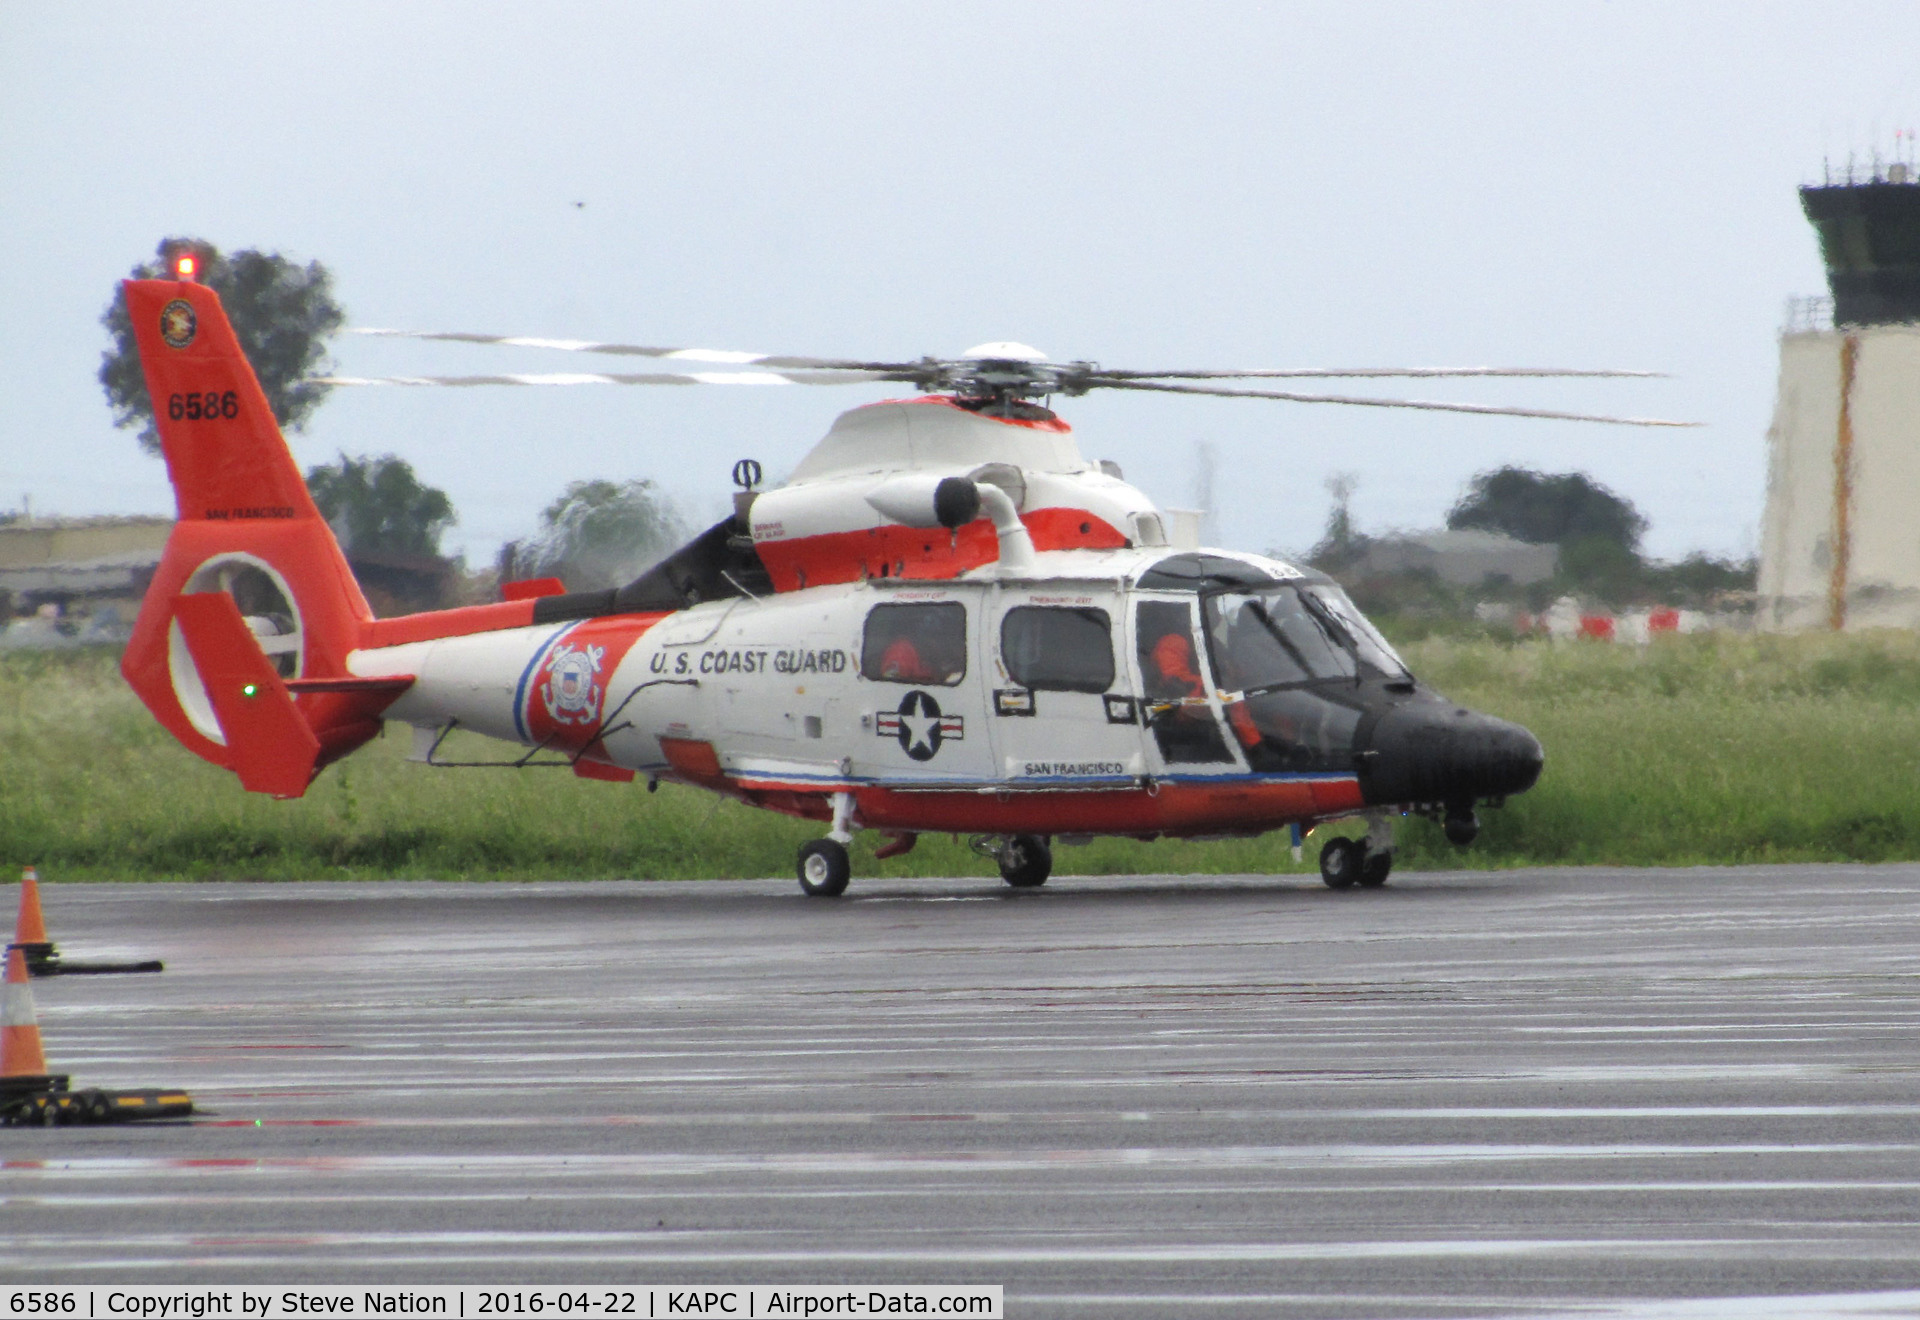 6586, Aerospatiale MH-65D Dolphin C/N 6285, USCG Aerospatiale HH-65C from CGAS San Francisco, CA taxiing out to resume mission @ Napa County Airport, CA